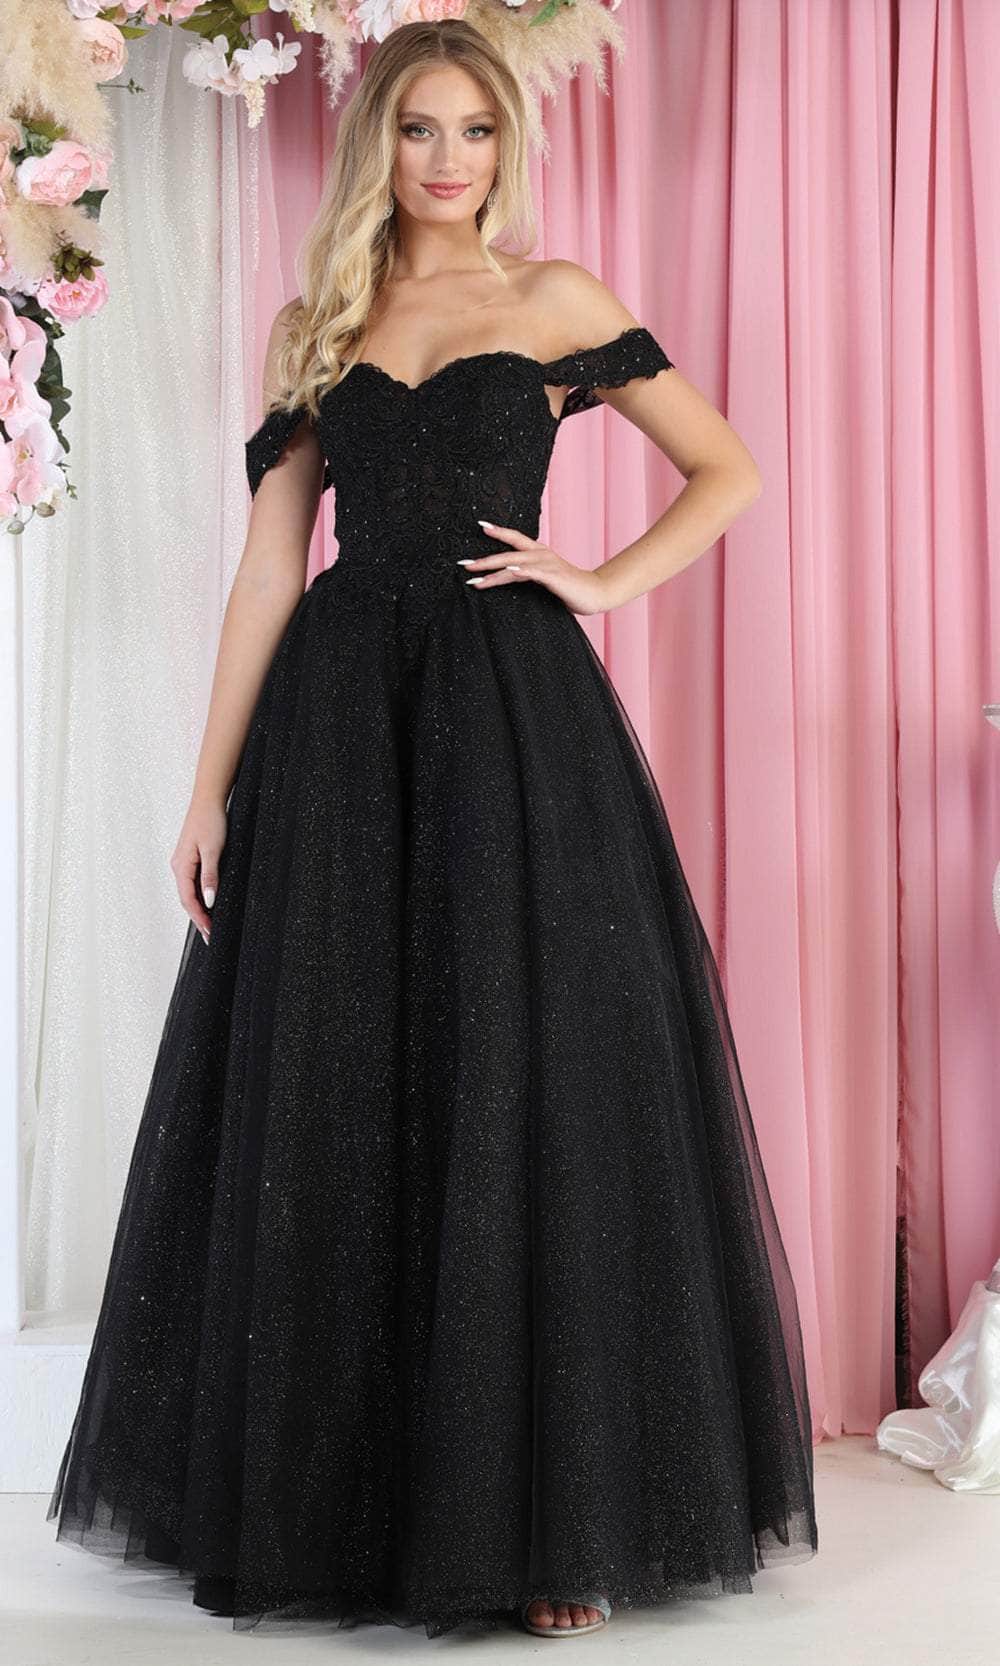 Image of May Queen LK194 - Sweetheart Applique Ballgown